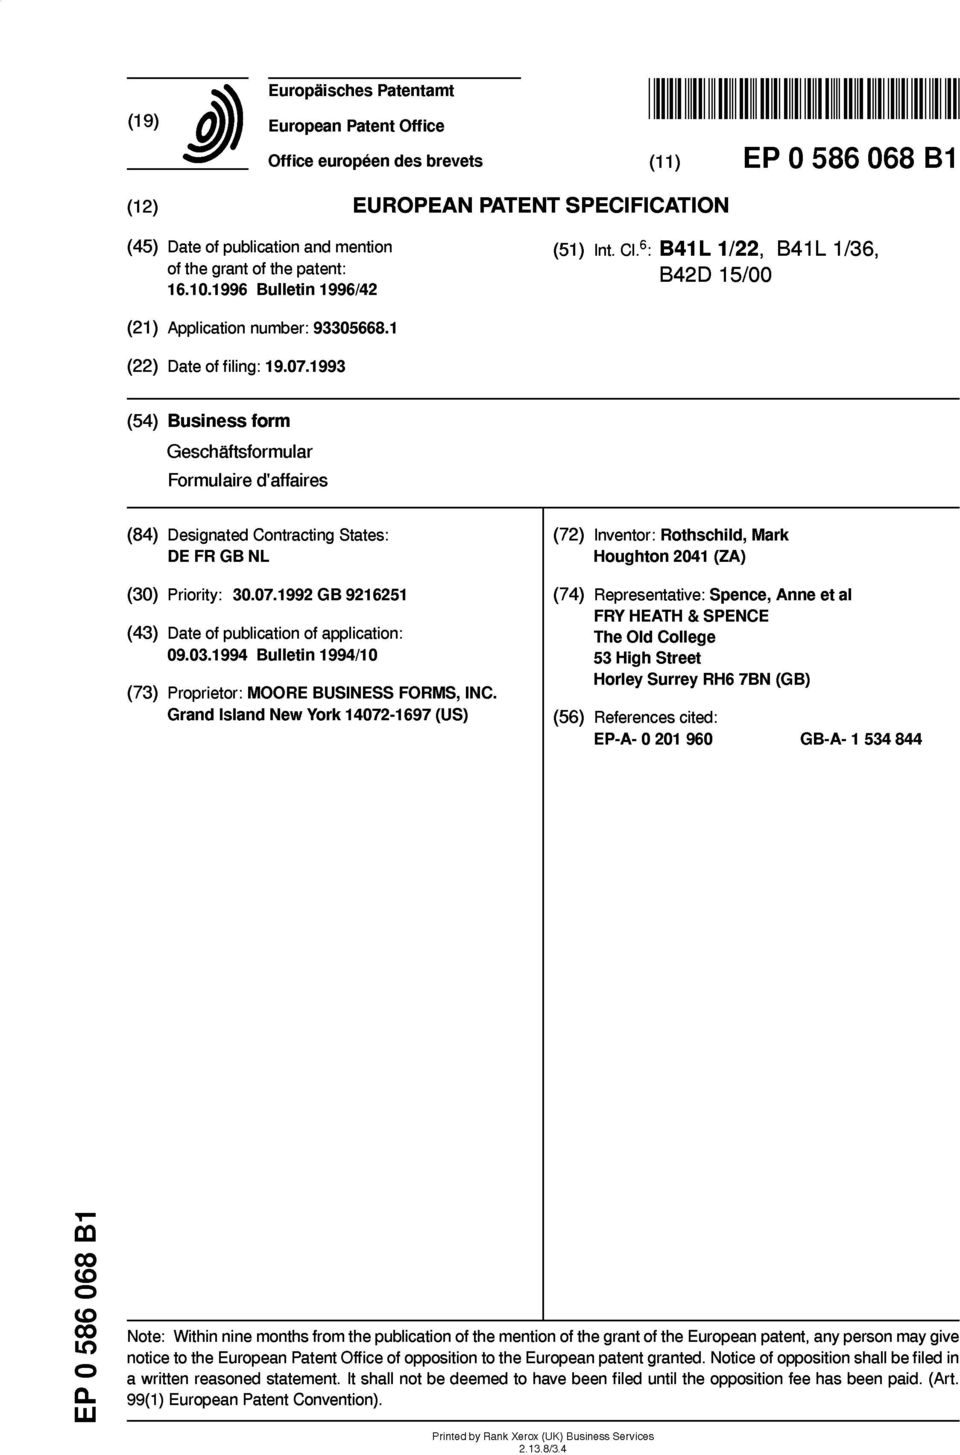 1 993 (54) Business form Geschaftsformular Formulaire d'affaires (84) Designated Contracting States: DE FR GB NL (30) Priority: 30.07.1992 GB 9216251 (43) Date of publication of application: 09.03.